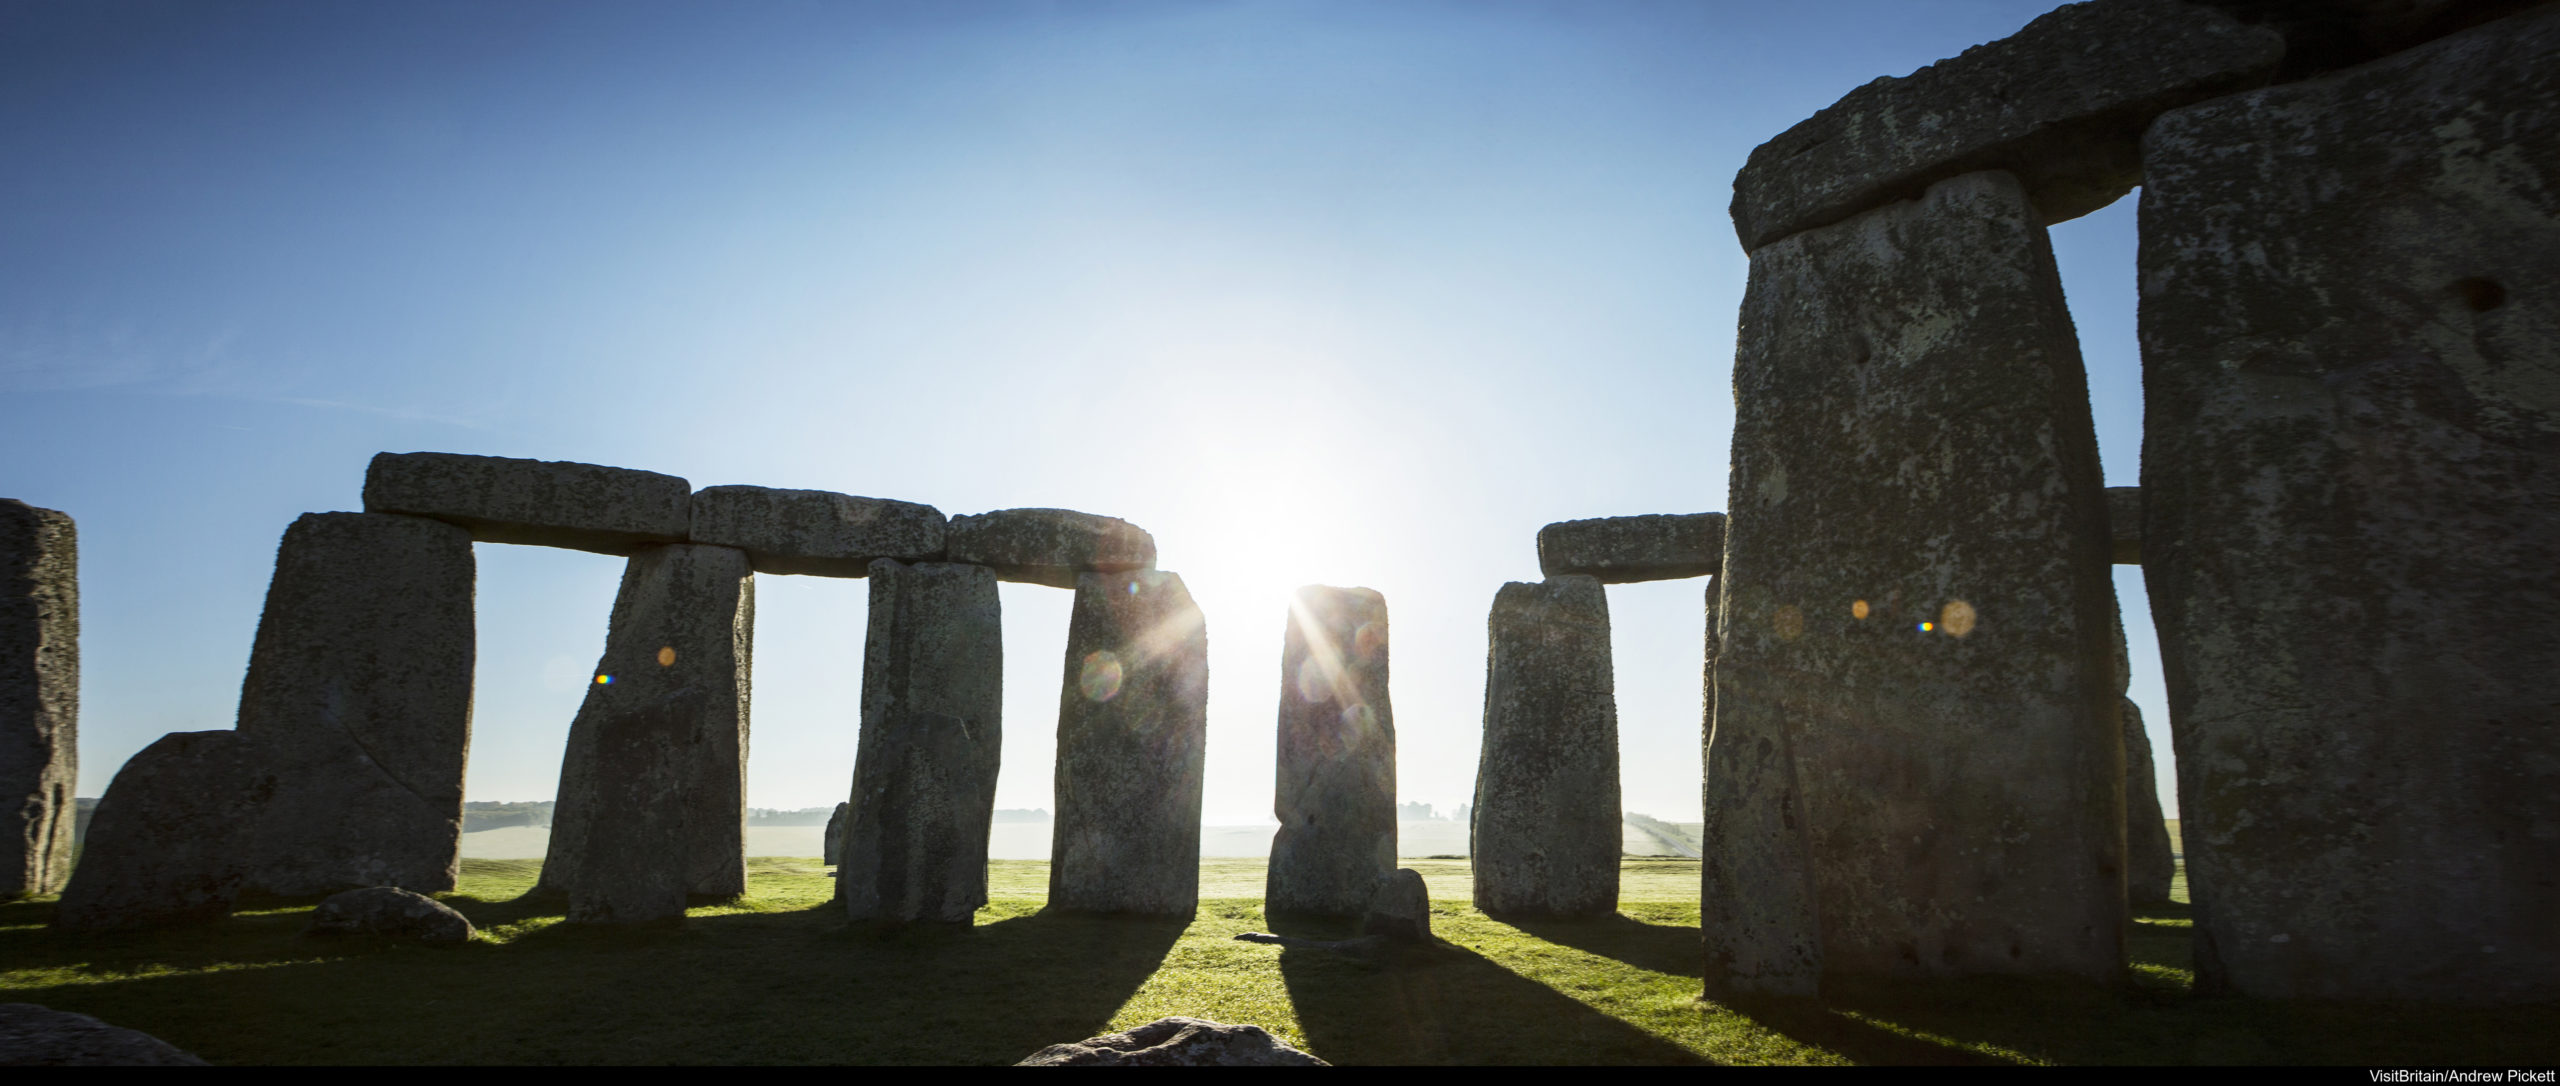 Additional Stonehenge 10 - A Quilters Tour of England and Wales: June 6 ...